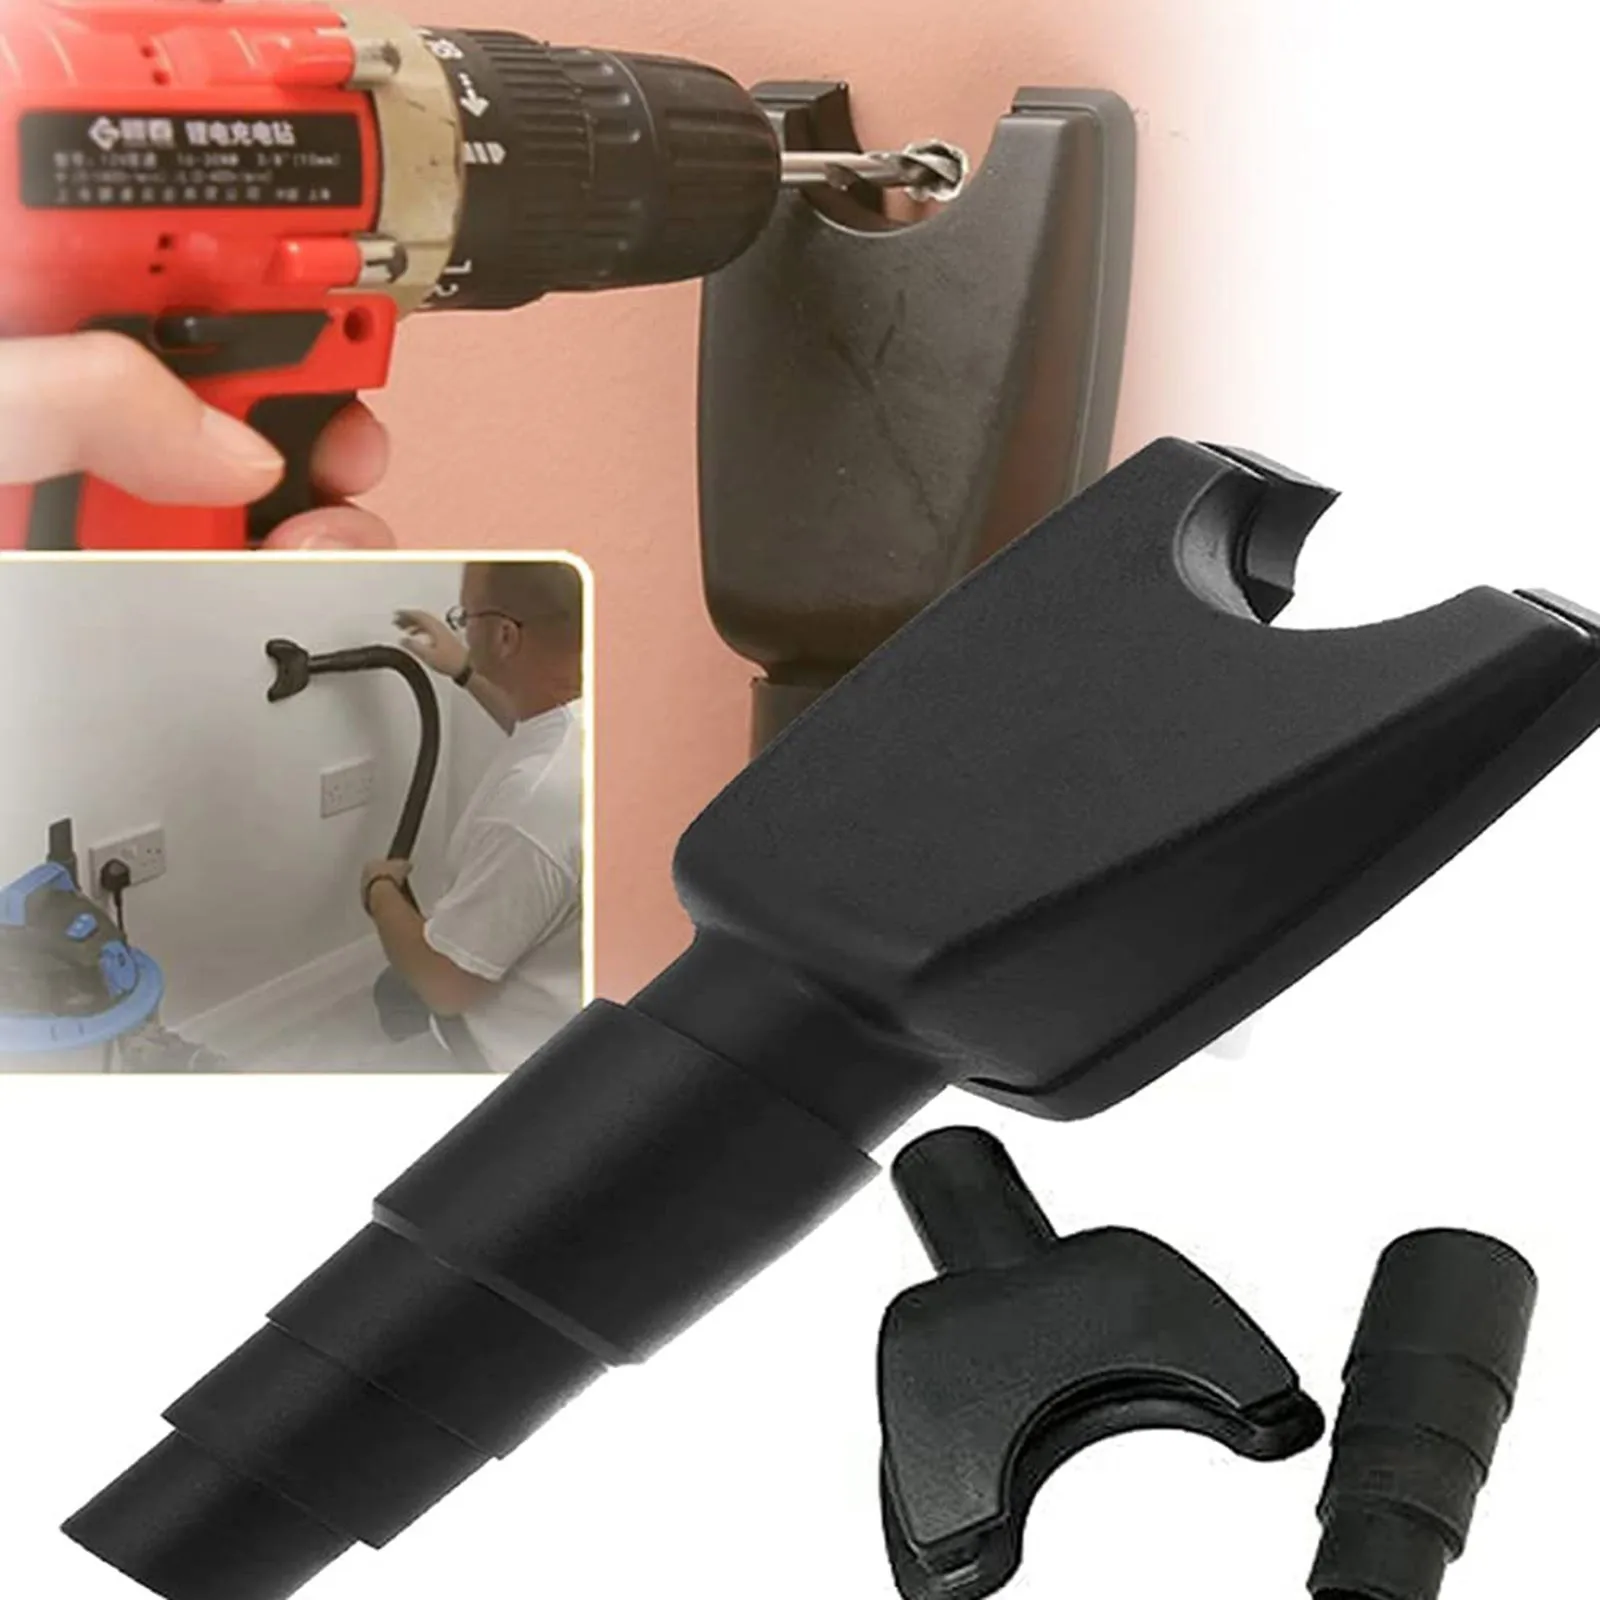 Hands-Free Dust Collectors,2 Pcs Drill Dust Extraction Tool,Electric Drill Dust Collector-Works with All Drill Types